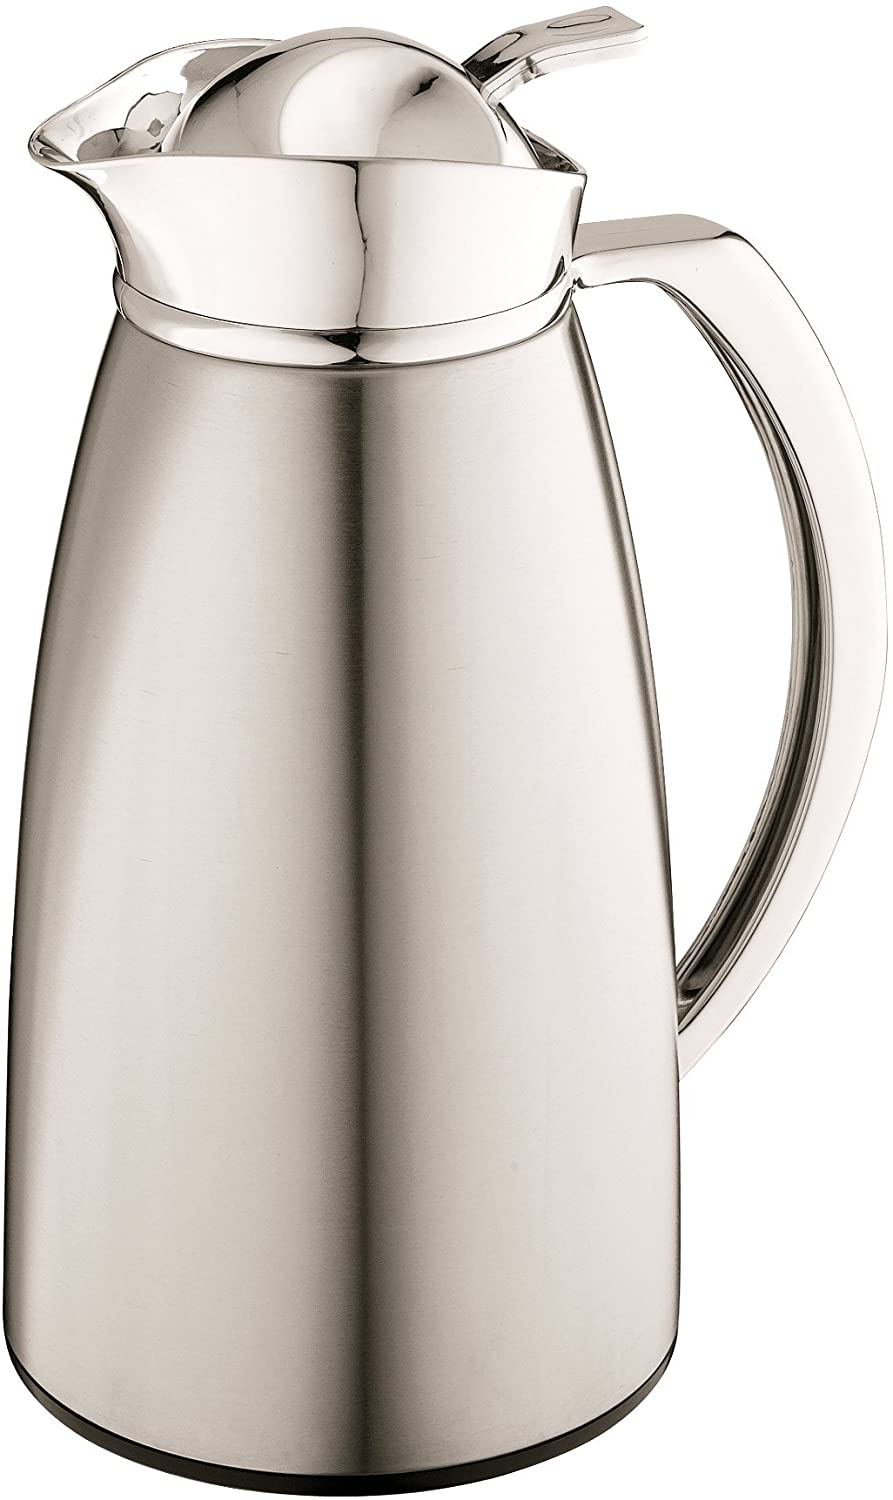 Axentia 116794 Vacuum Flask Cover Glass Insert Coffee Pot, 1 Litre, Stainless Steel, 13.5 x 13.5 x 28 cm